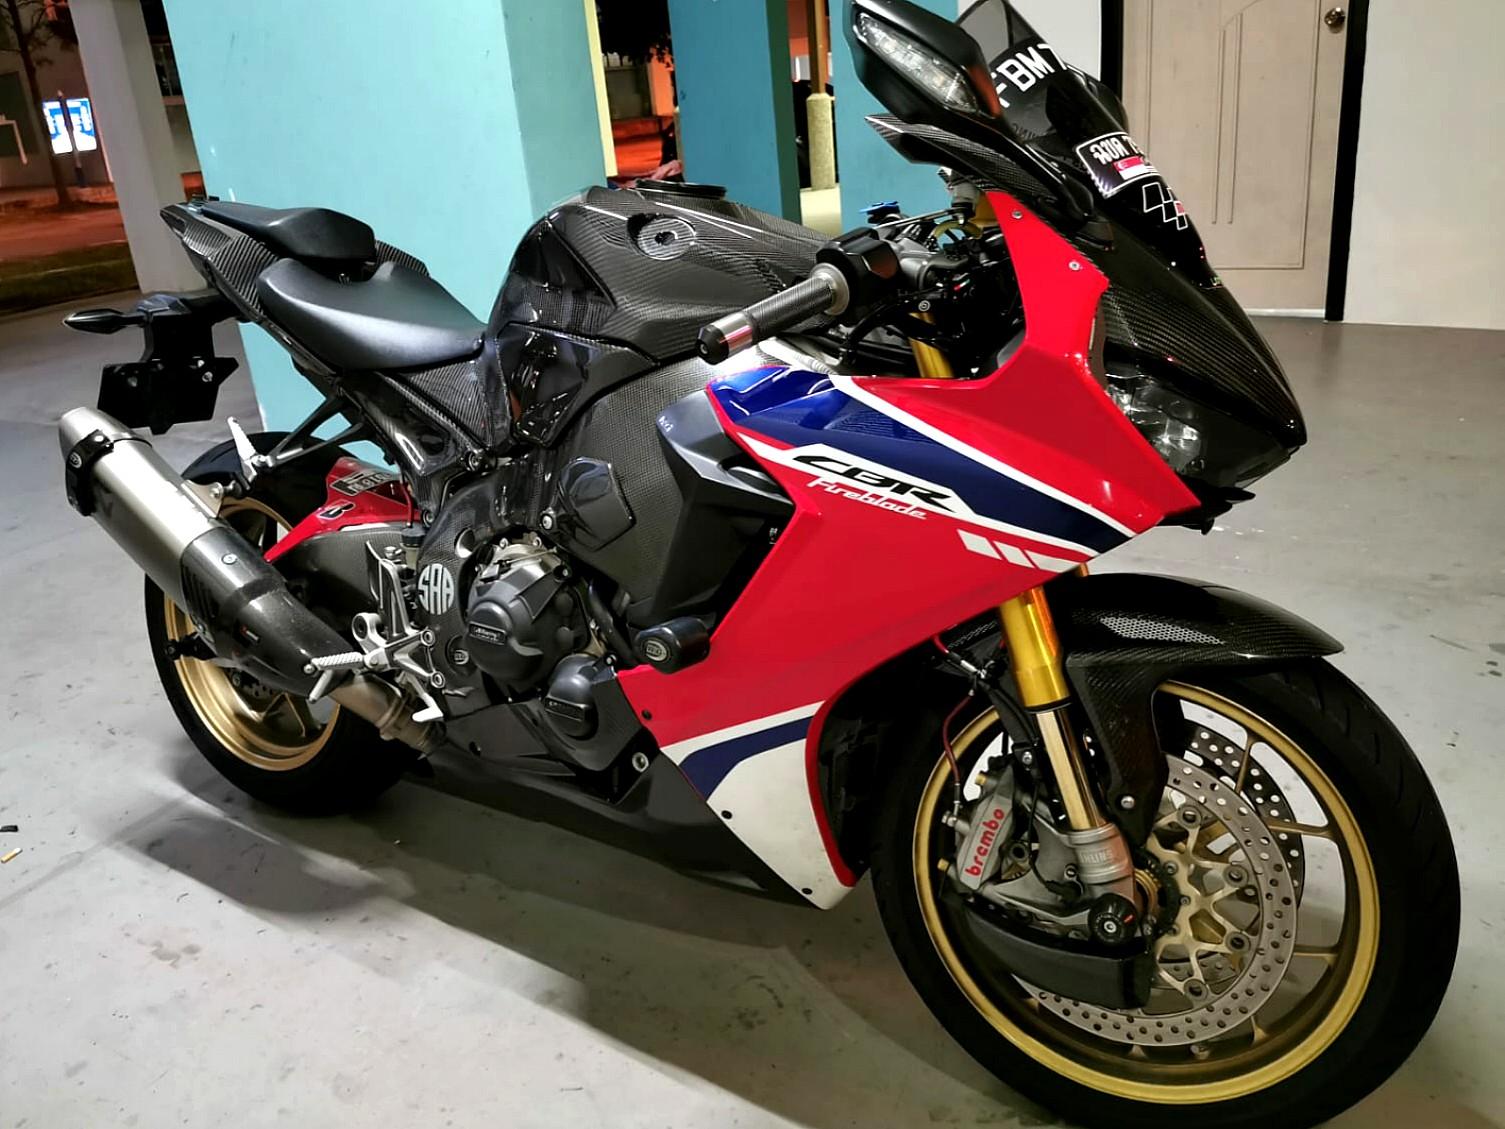 17 Honda Cbr1000rr Sp1 Carbon Parts Motorcycles Motorcycle Accessories On Carousell